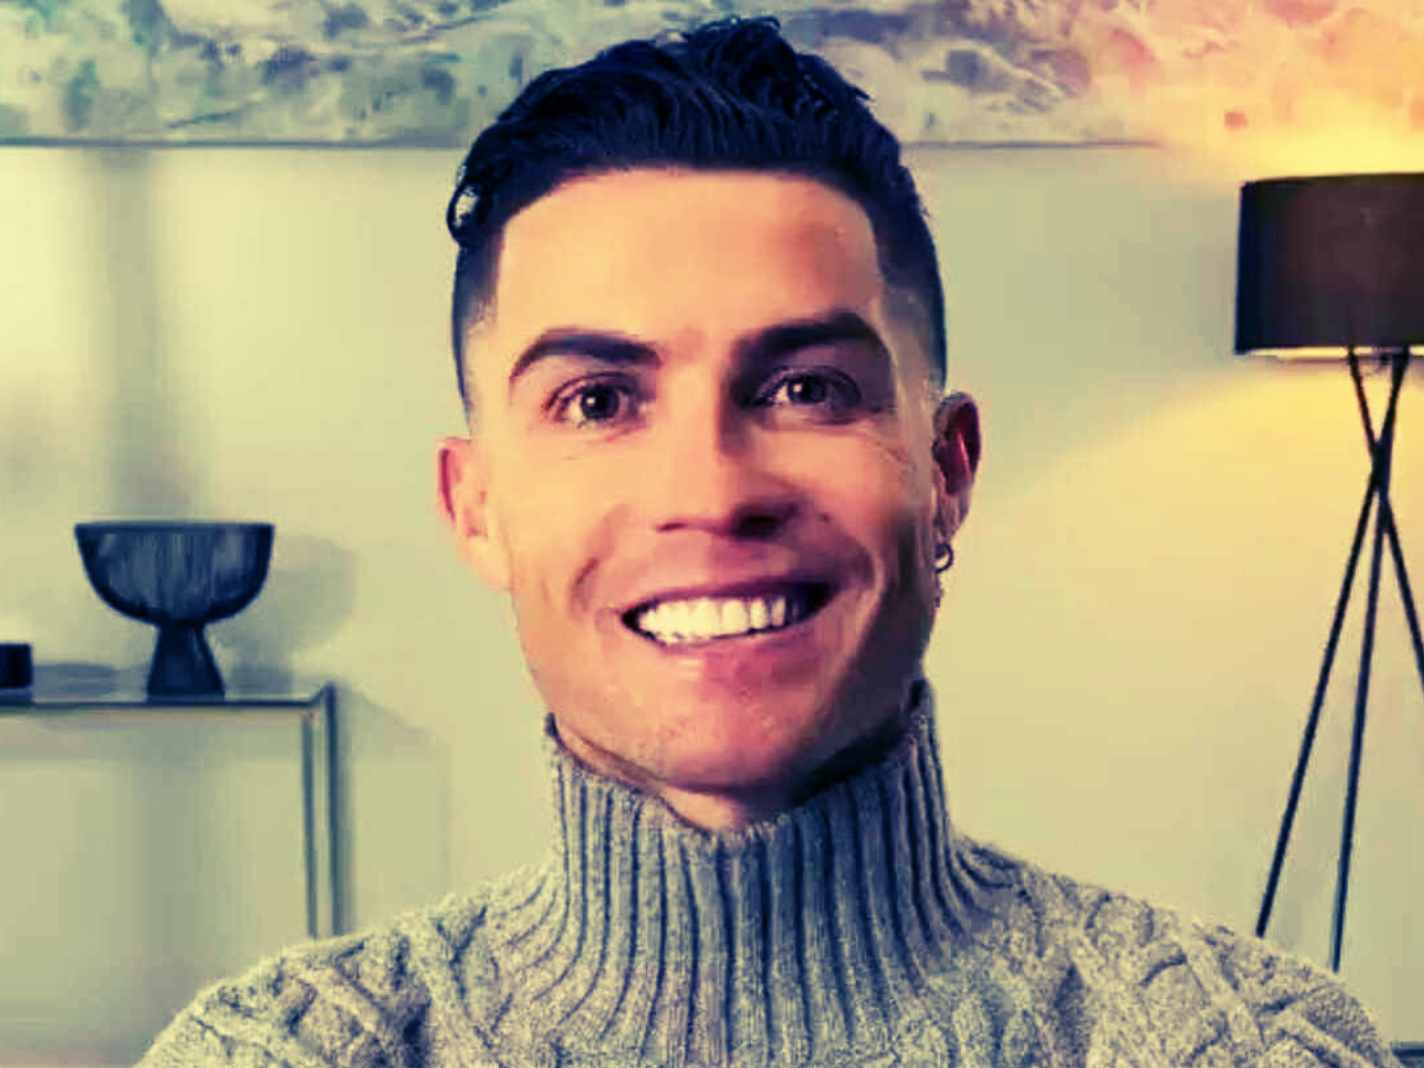 Rare Photos of Cristiano Ronaldo with a Beard: Why Does It Come and Go?